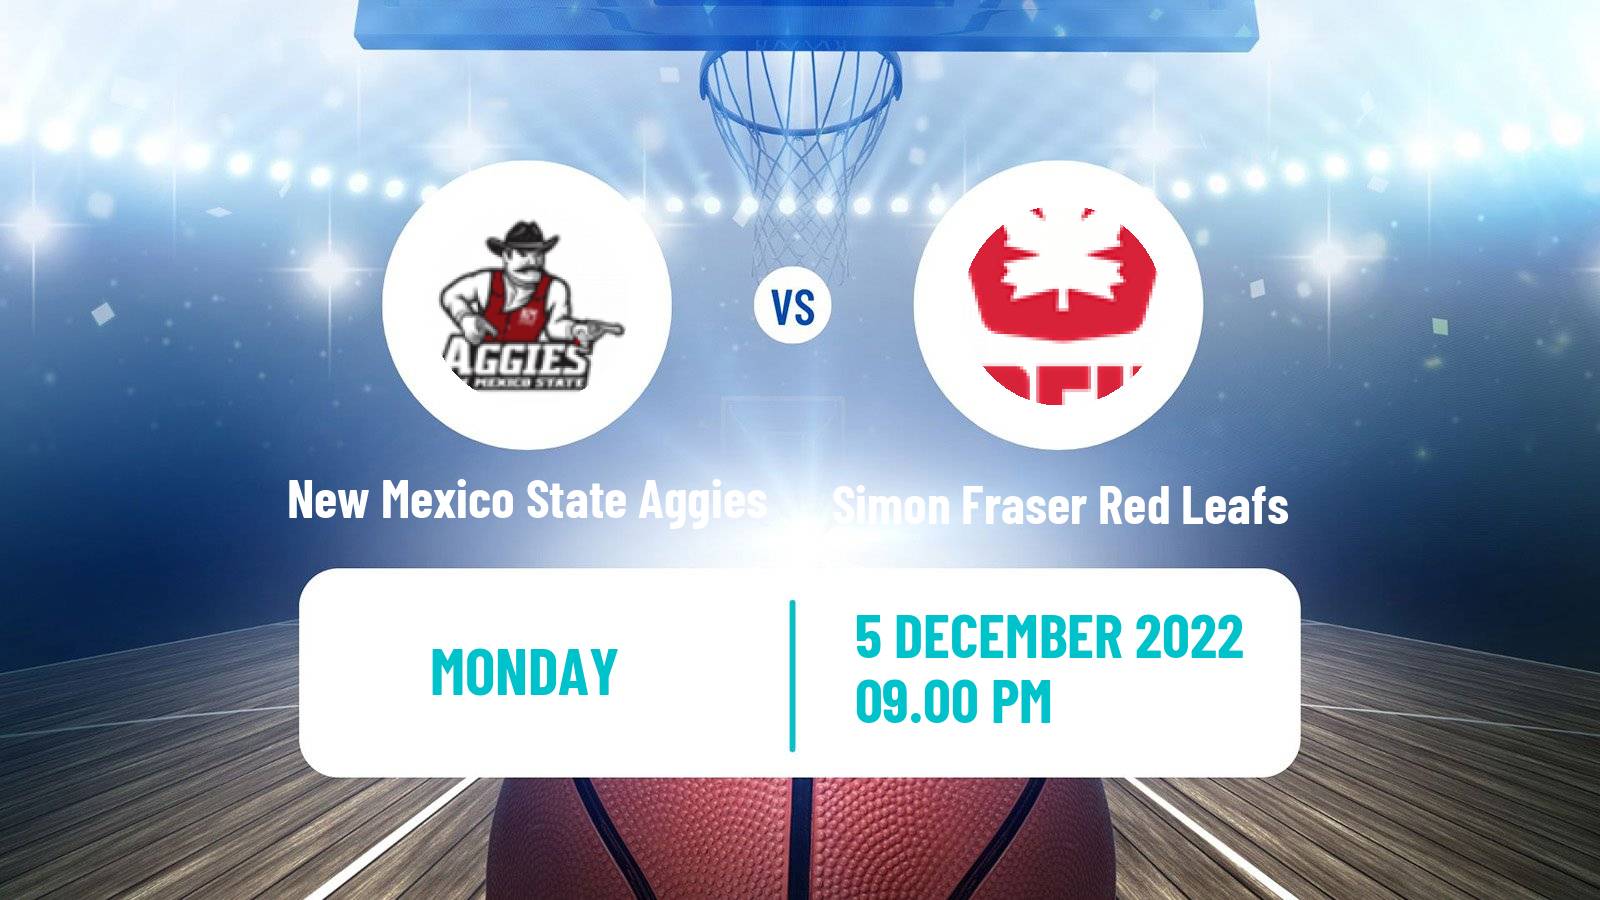 Basketball NCAA College Basketball New Mexico State Aggies - Simon Fraser Red Leafs